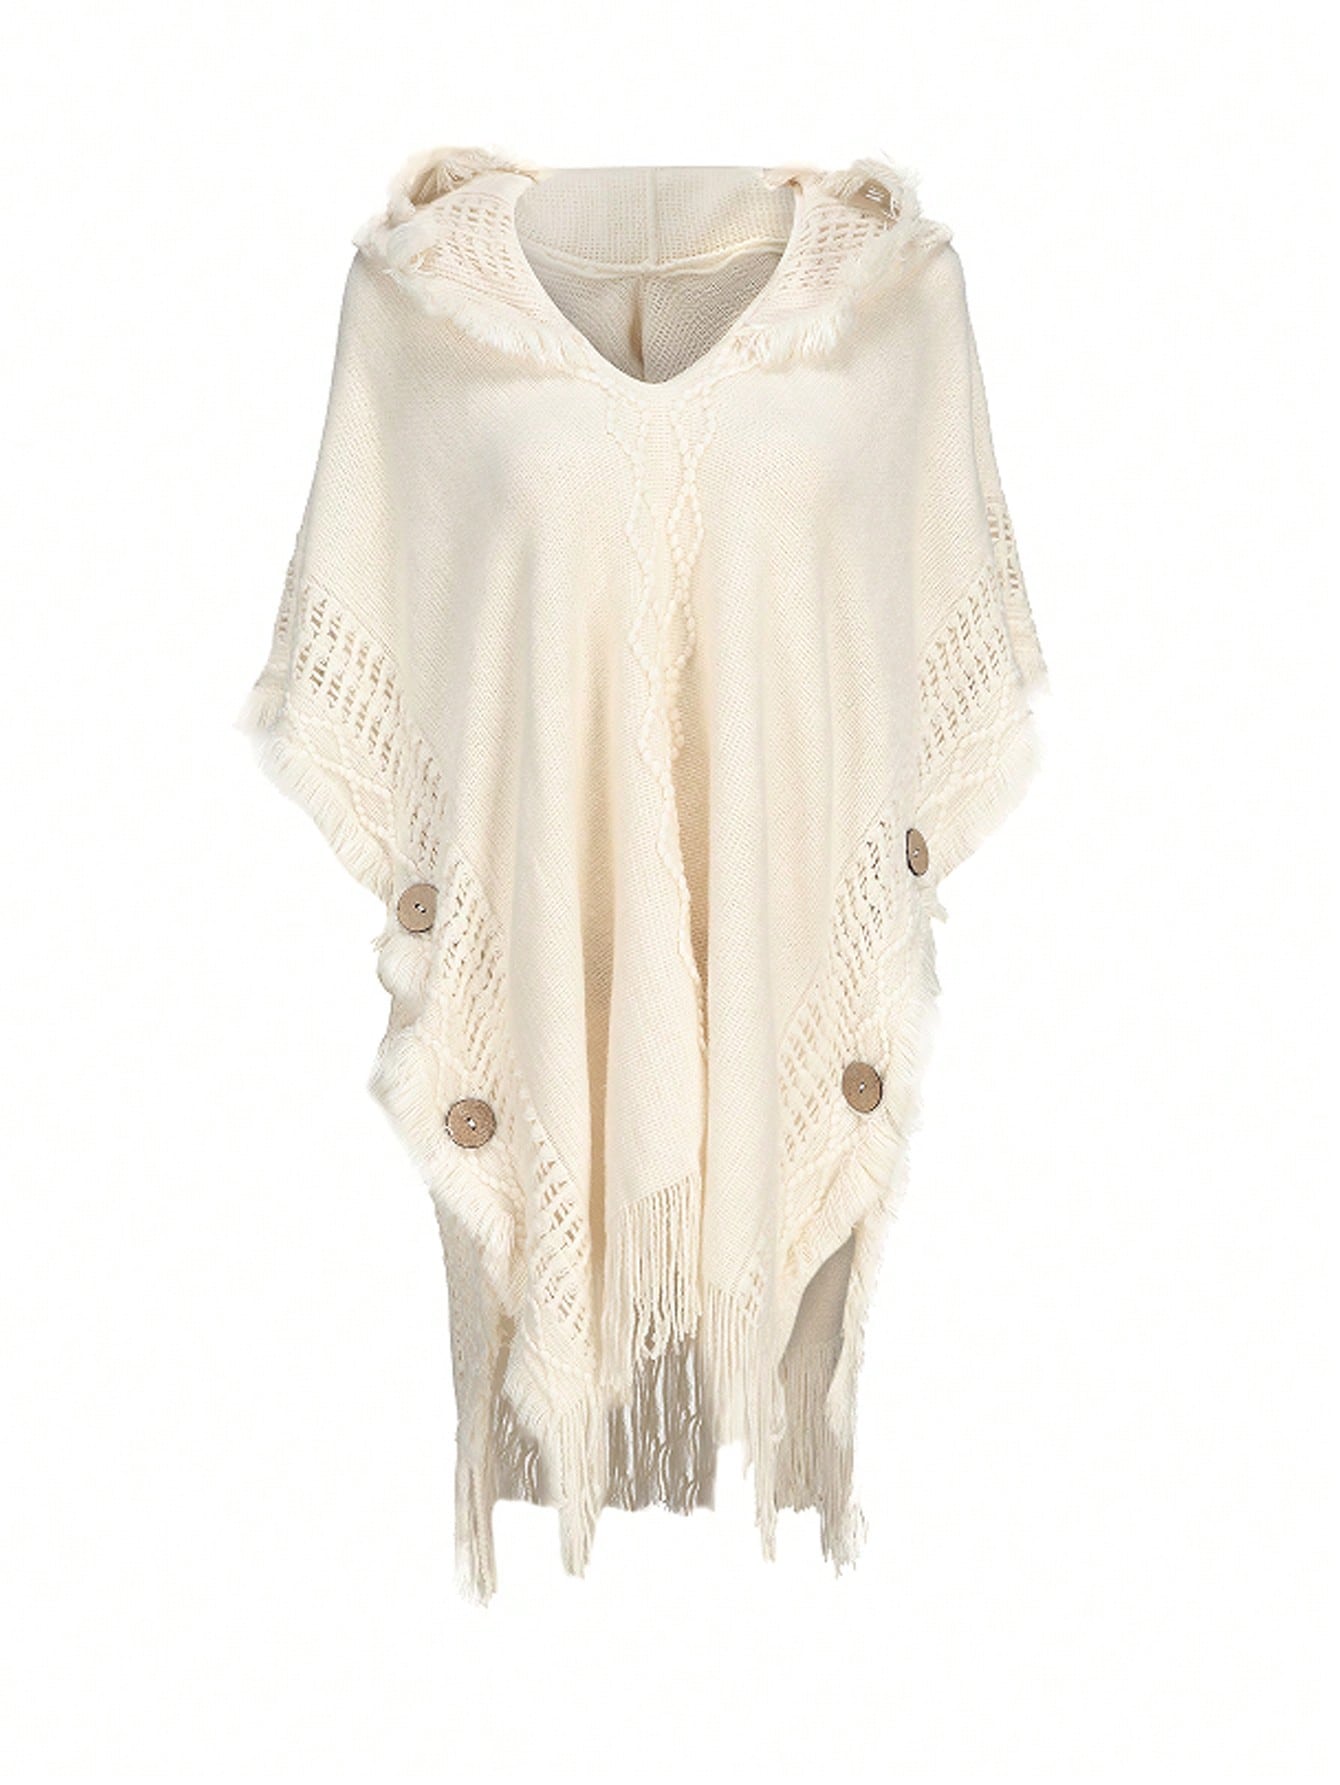 Essnce 1pc Hooded Sweater With Fringe Detail Decorative Button Cape